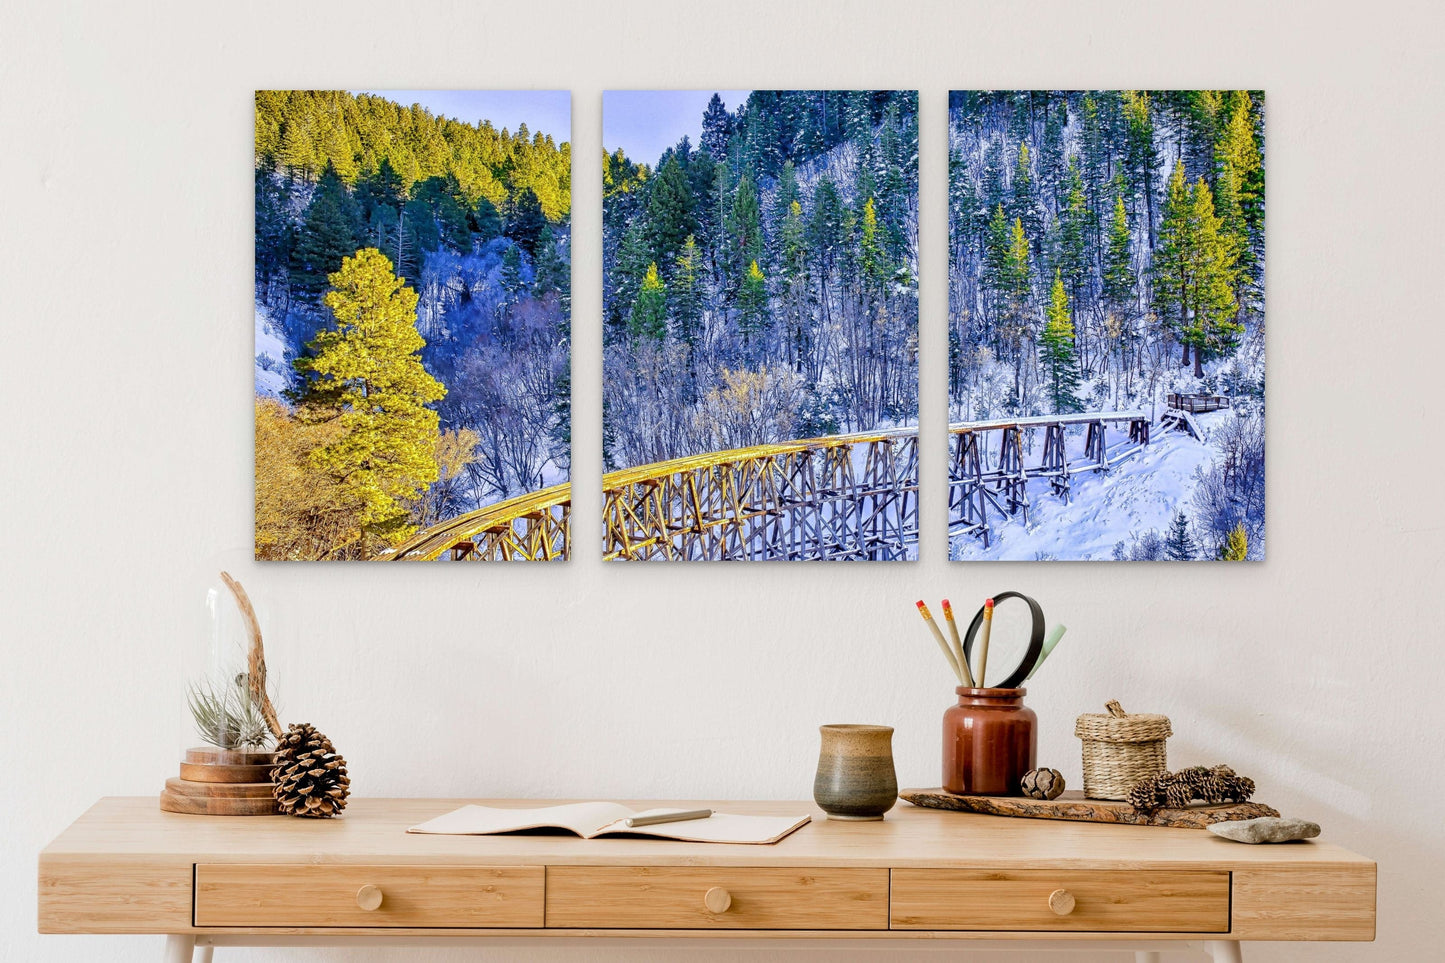 Wimberley Puzzle Company Posters, Prints, & Visual Artwork 16x24" Triptych Cloudcroft Train Trestle in Winter, New Mexico Wooden Print Wall Art